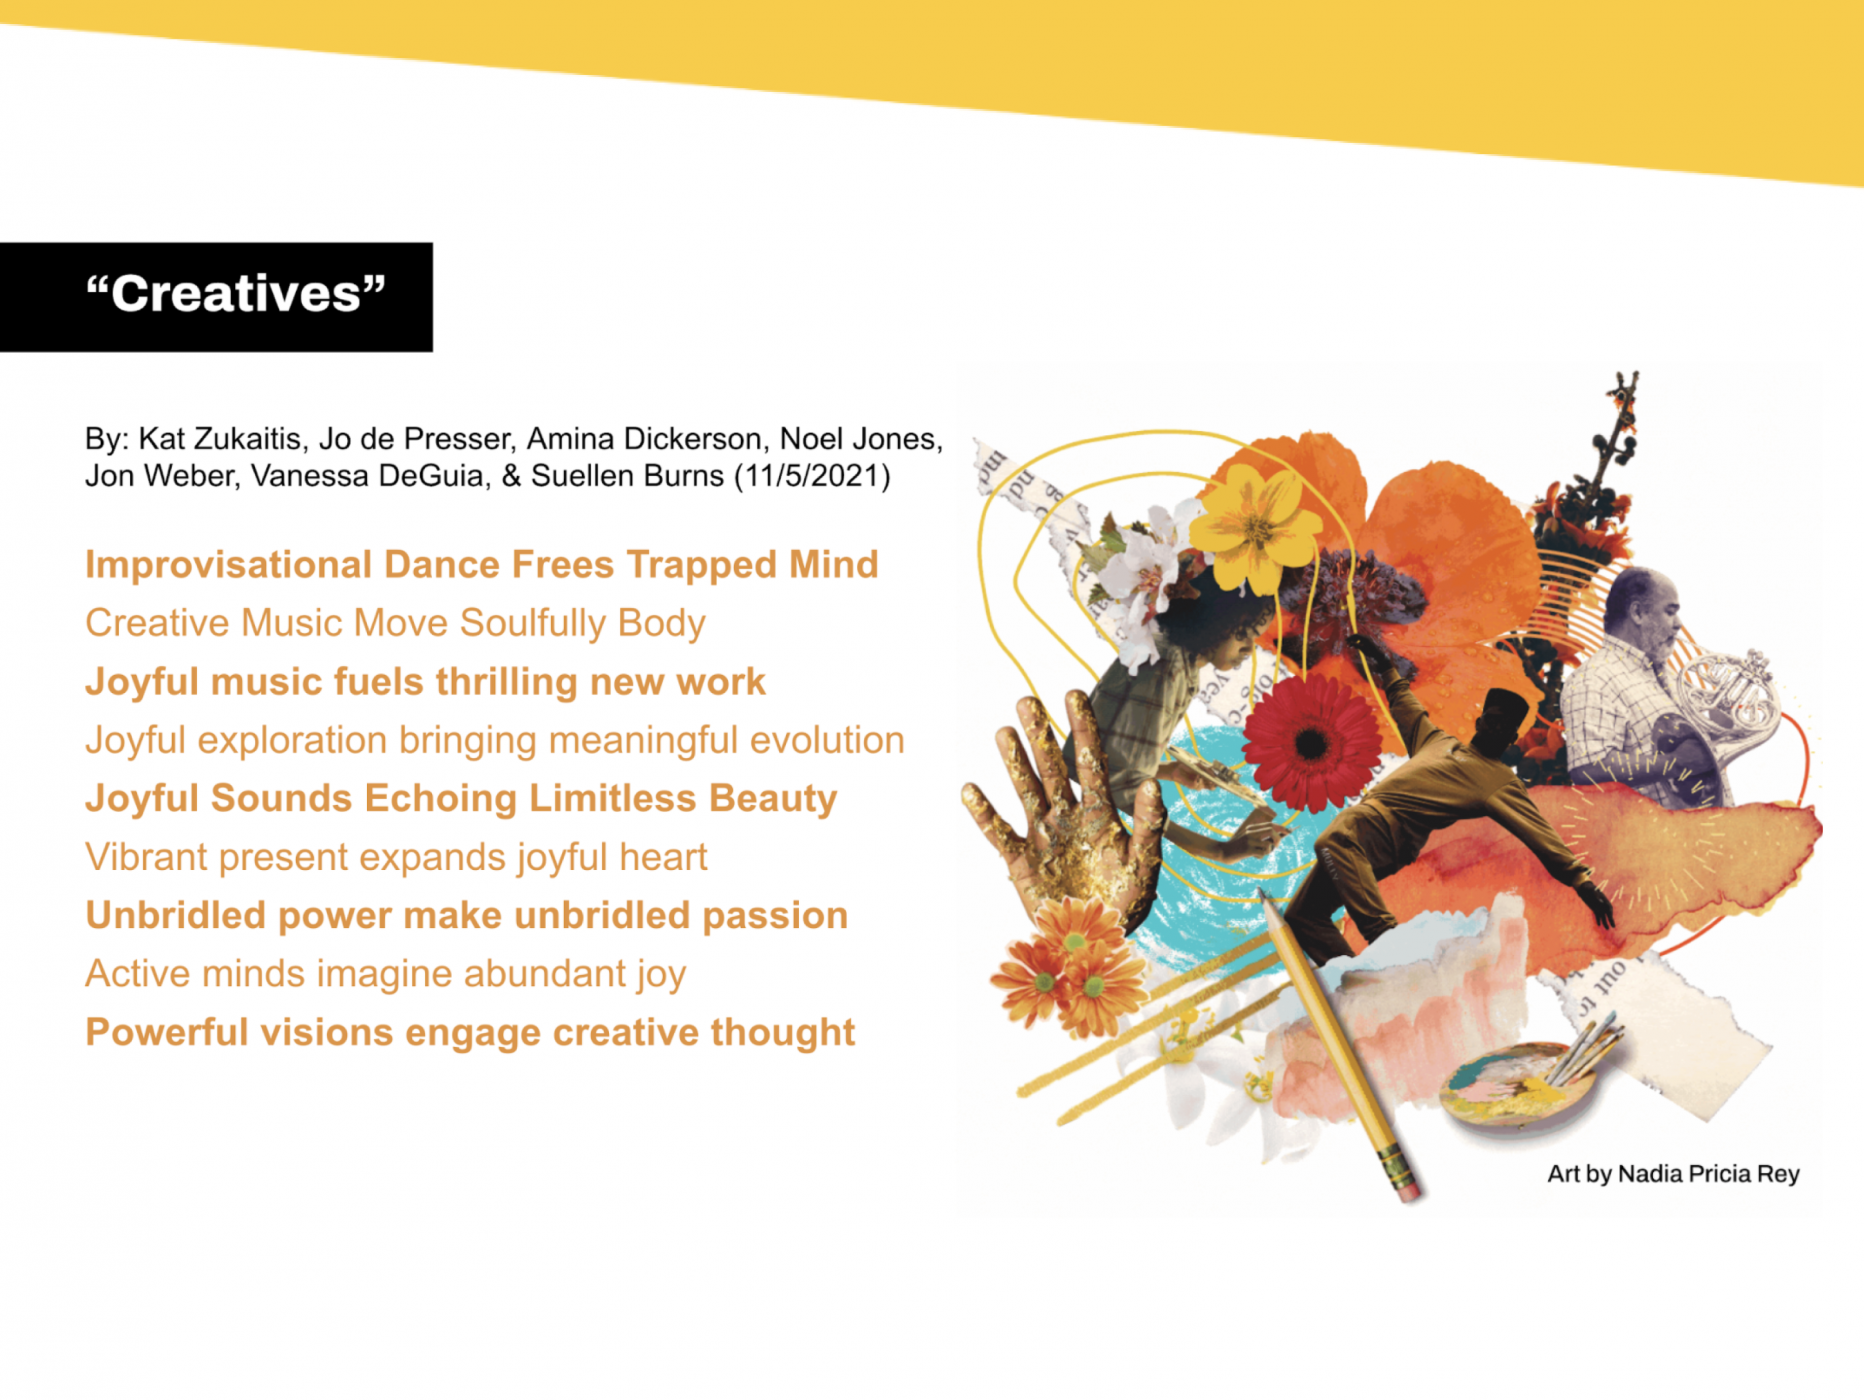 slide with the header "Creatives" showing a poem in orange text next to a bright and colorful collage